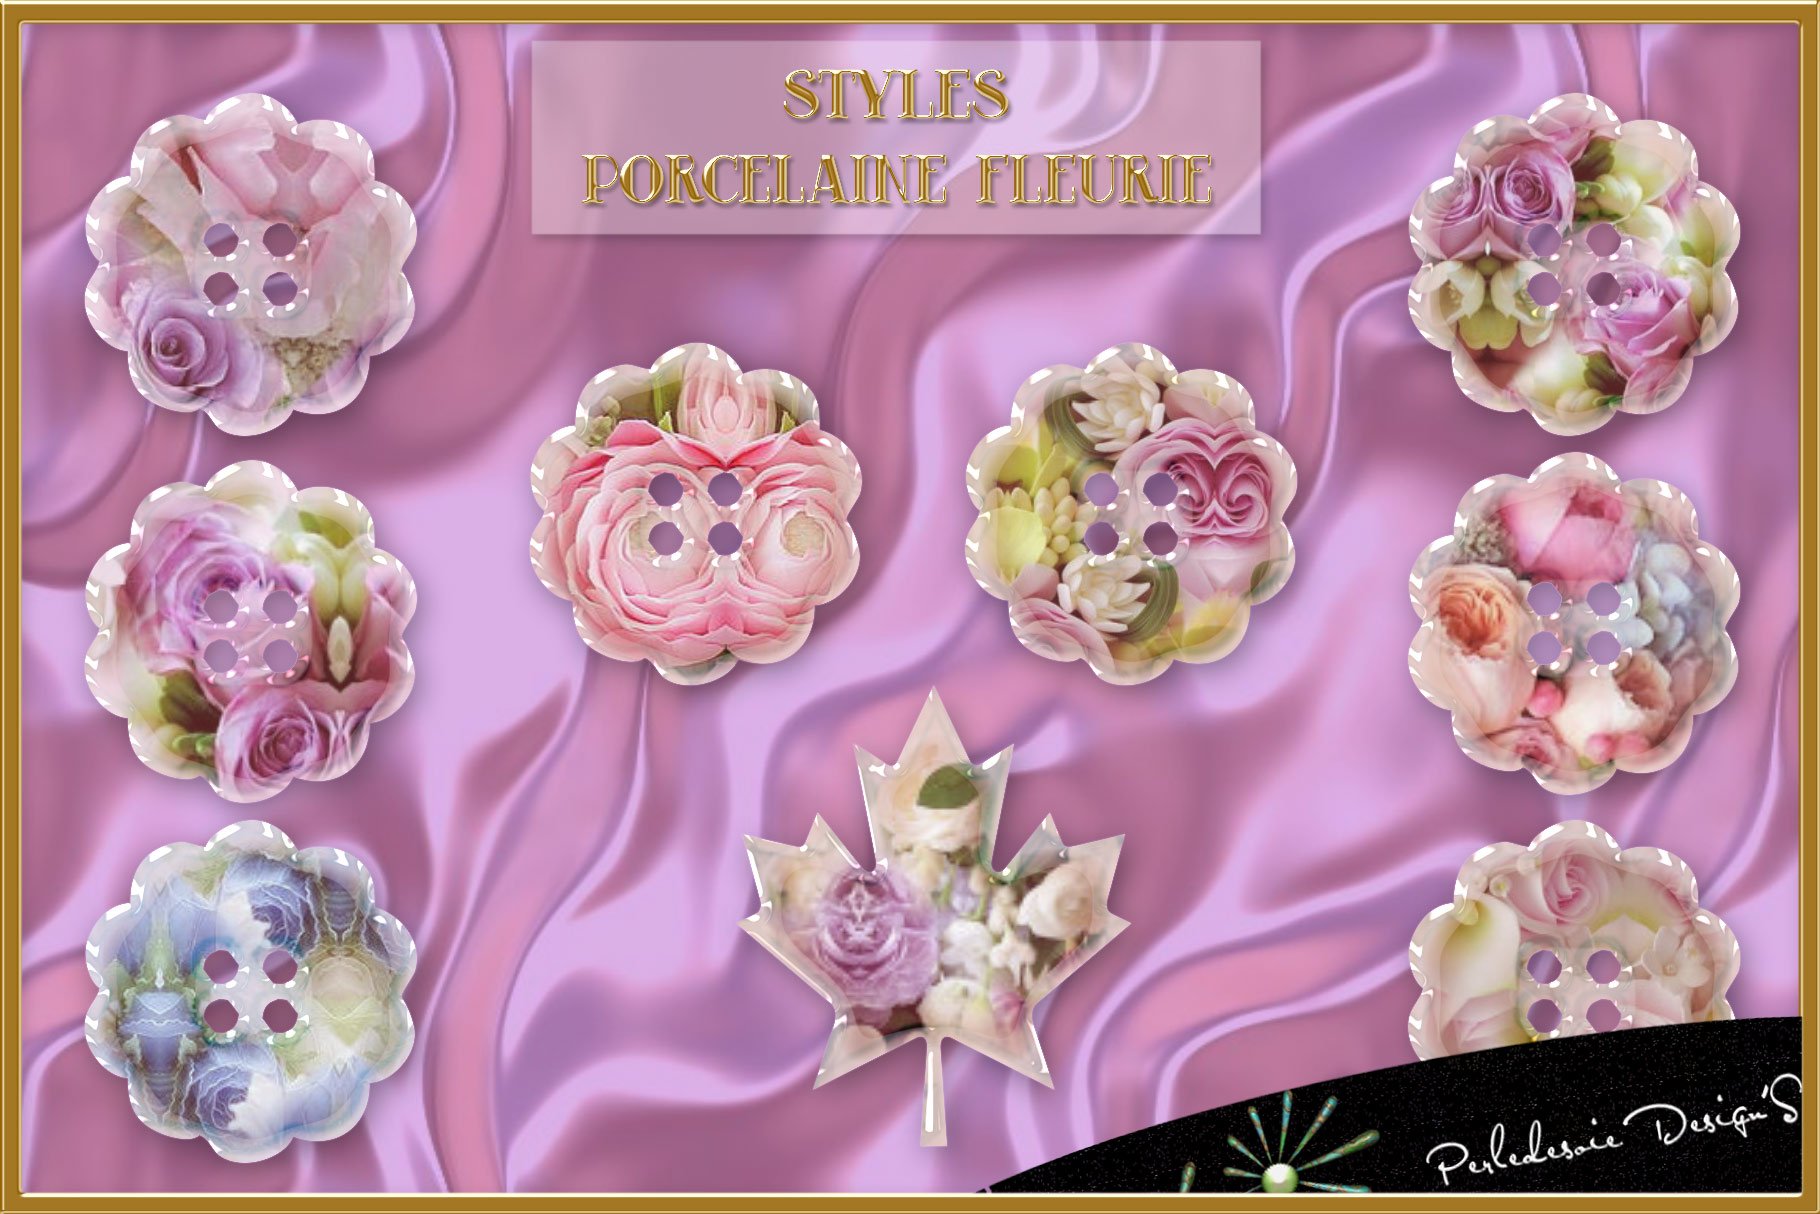 Styles Porcelaine Fleuriepreview image.